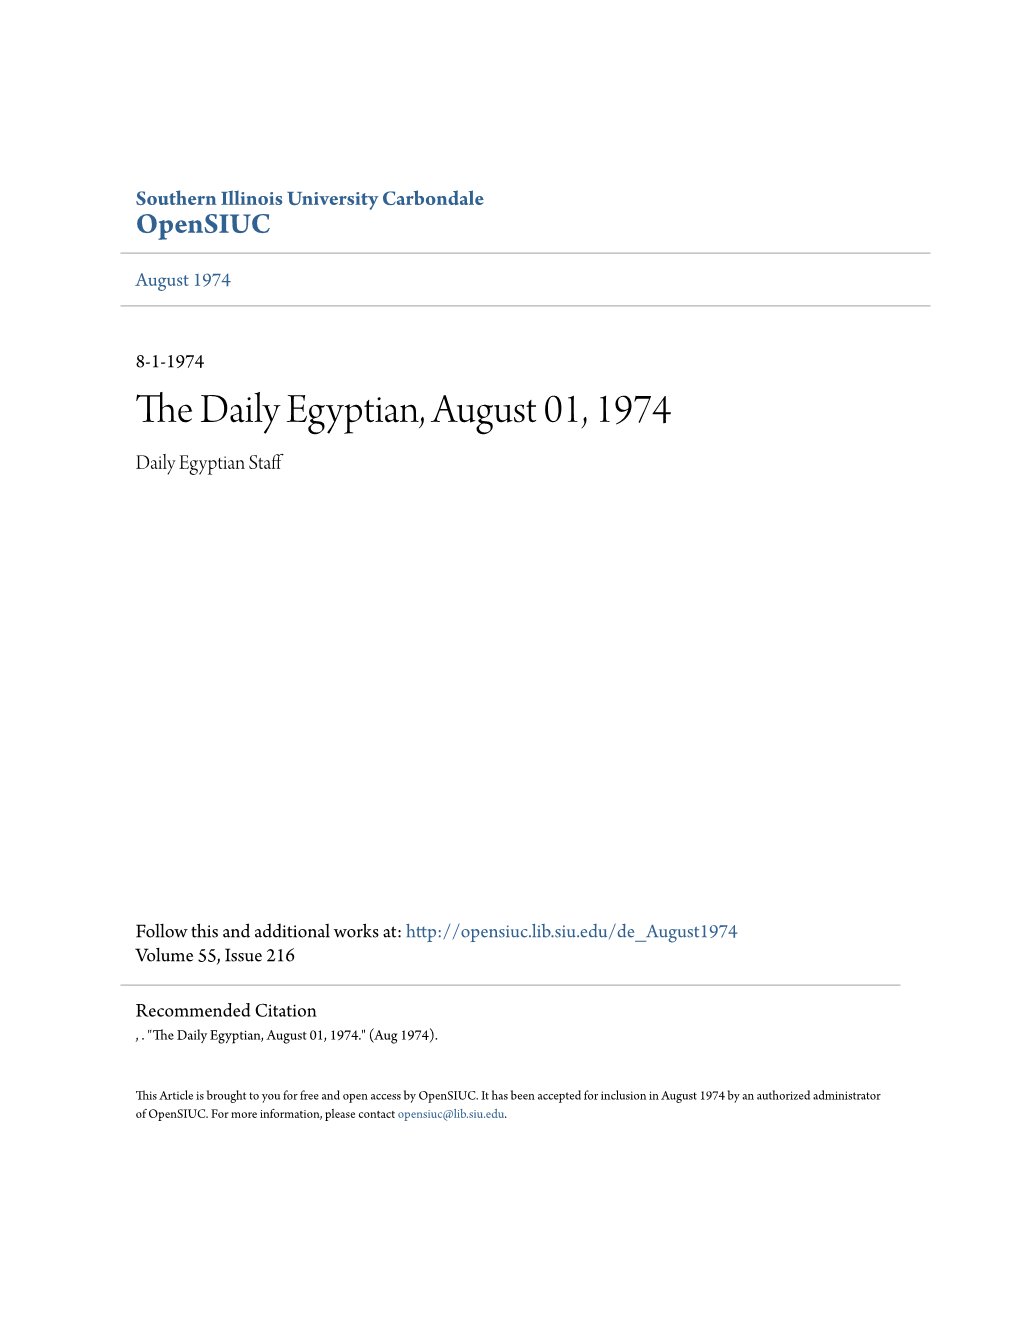 The Daily Egyptian, August 01, 1974